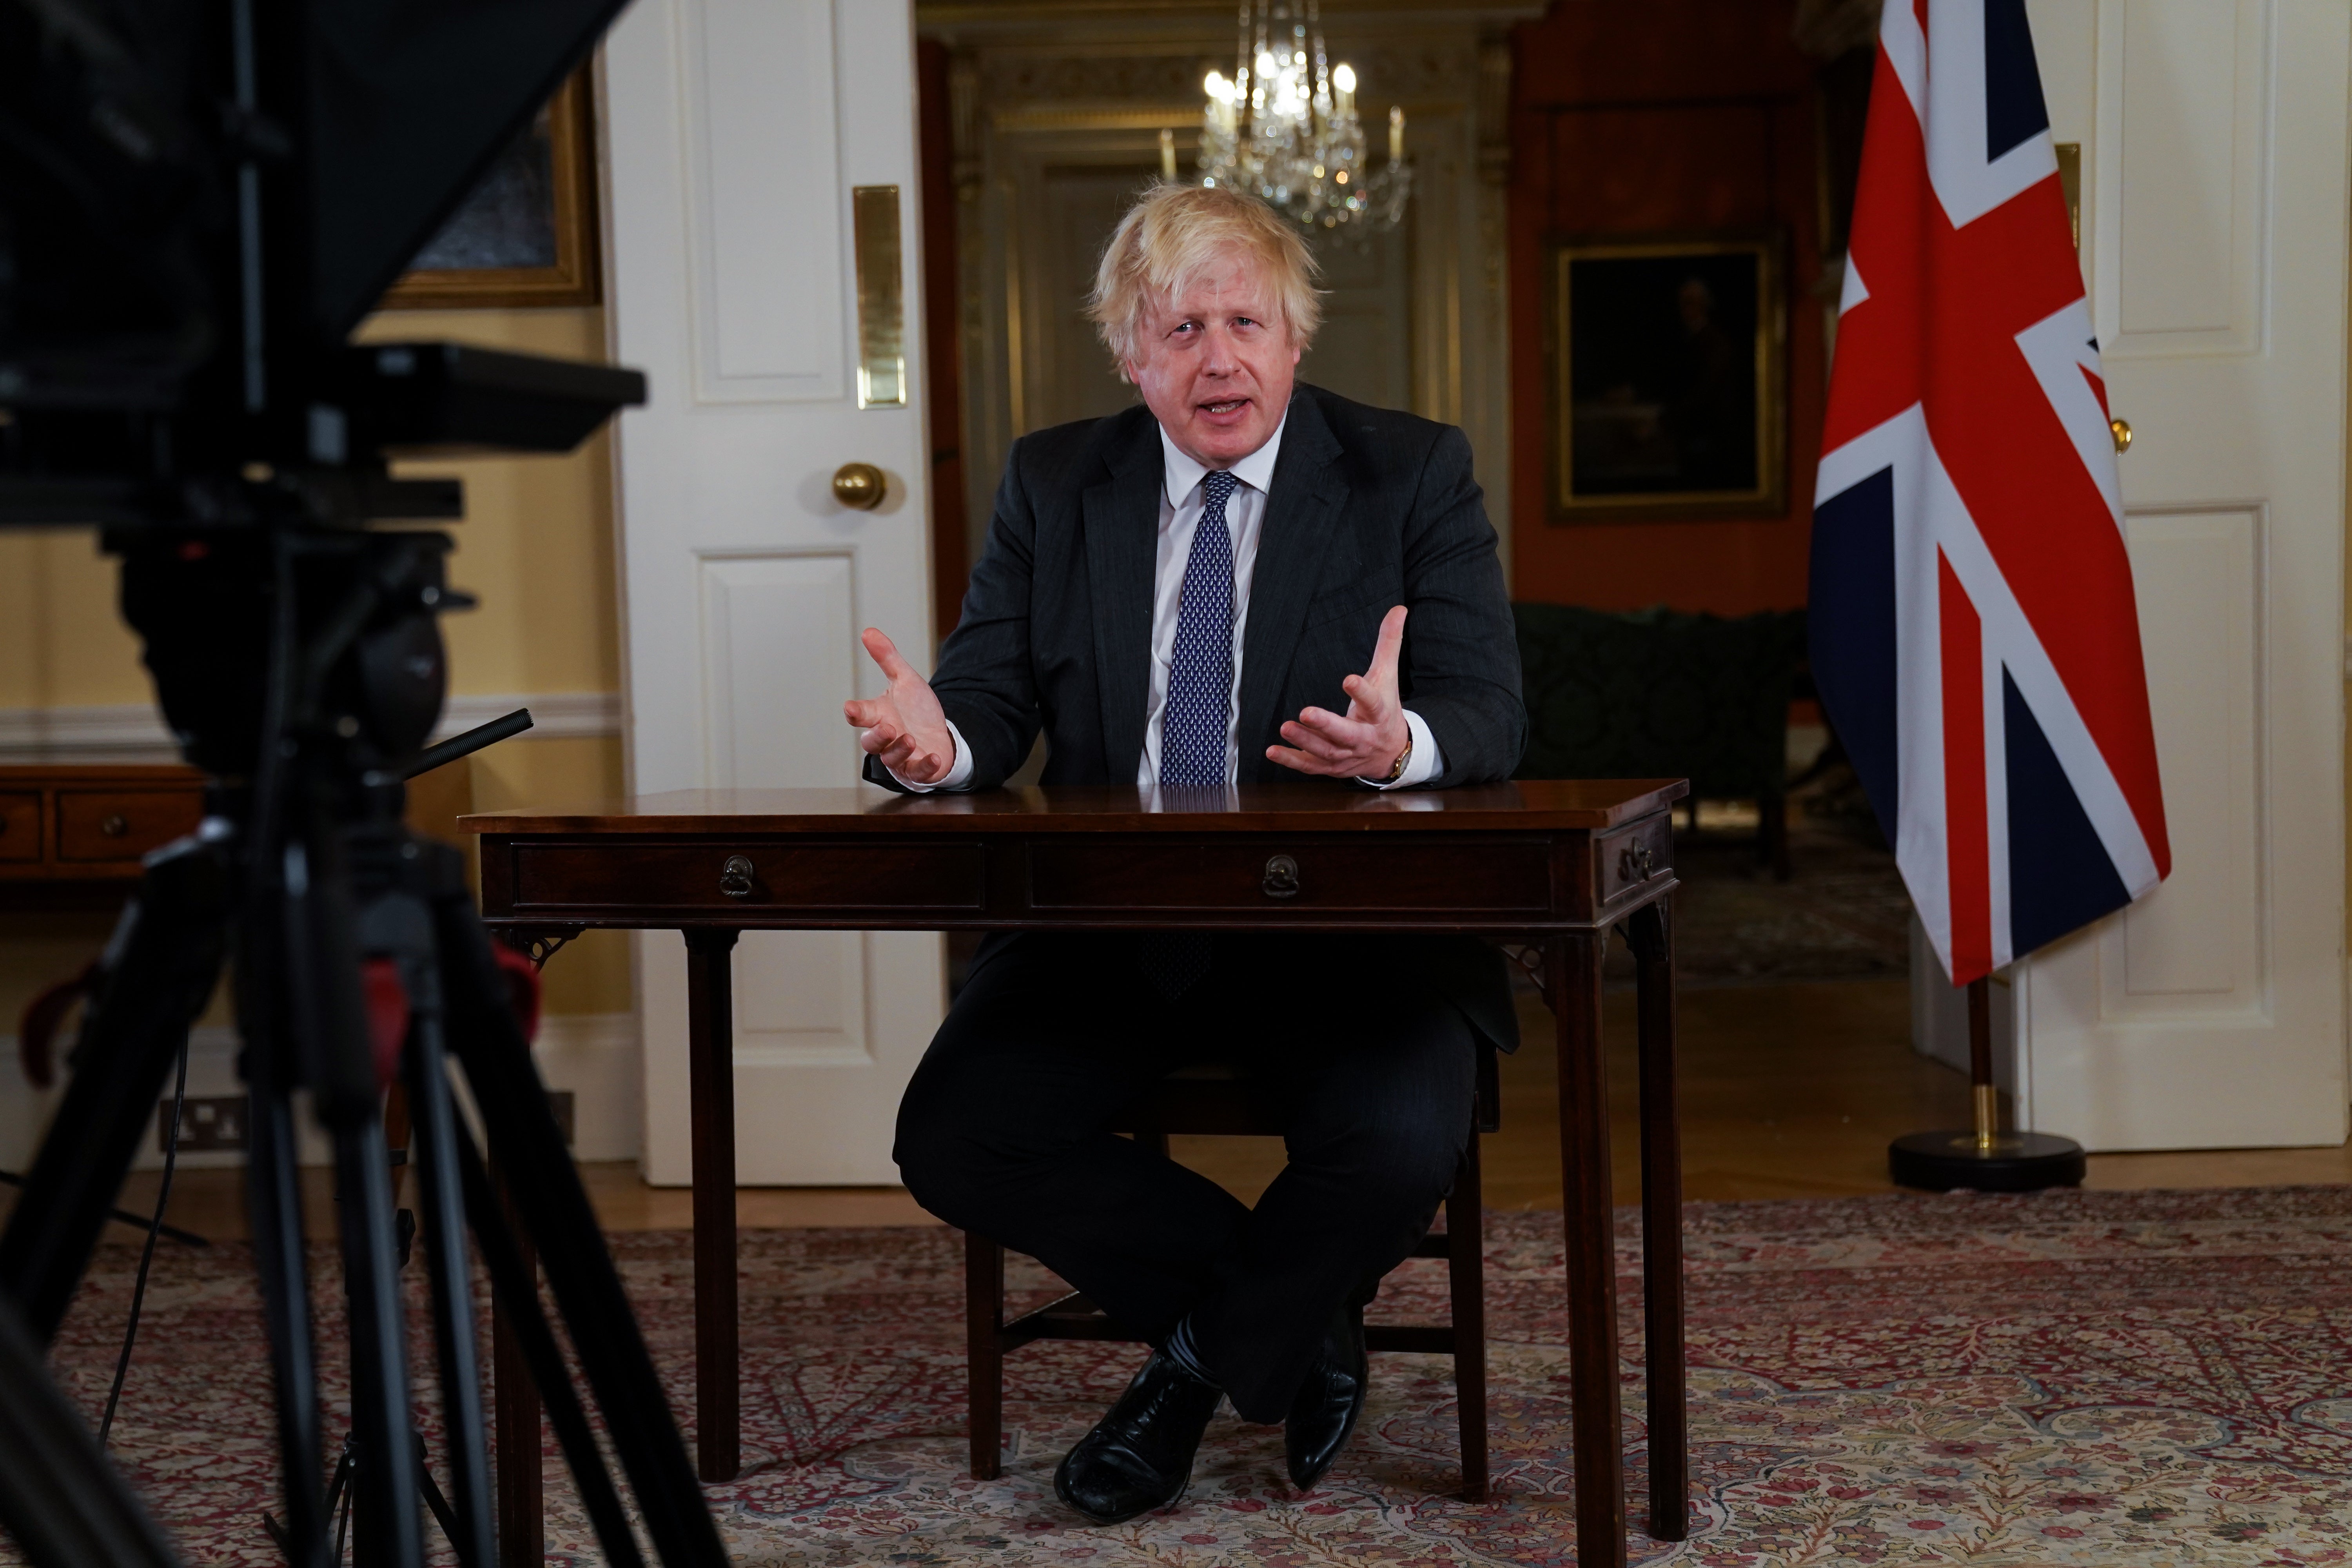 Prime Minister Boris Johnson records an address to the nation at Downing Street (Kirsty O’Connor/PA).